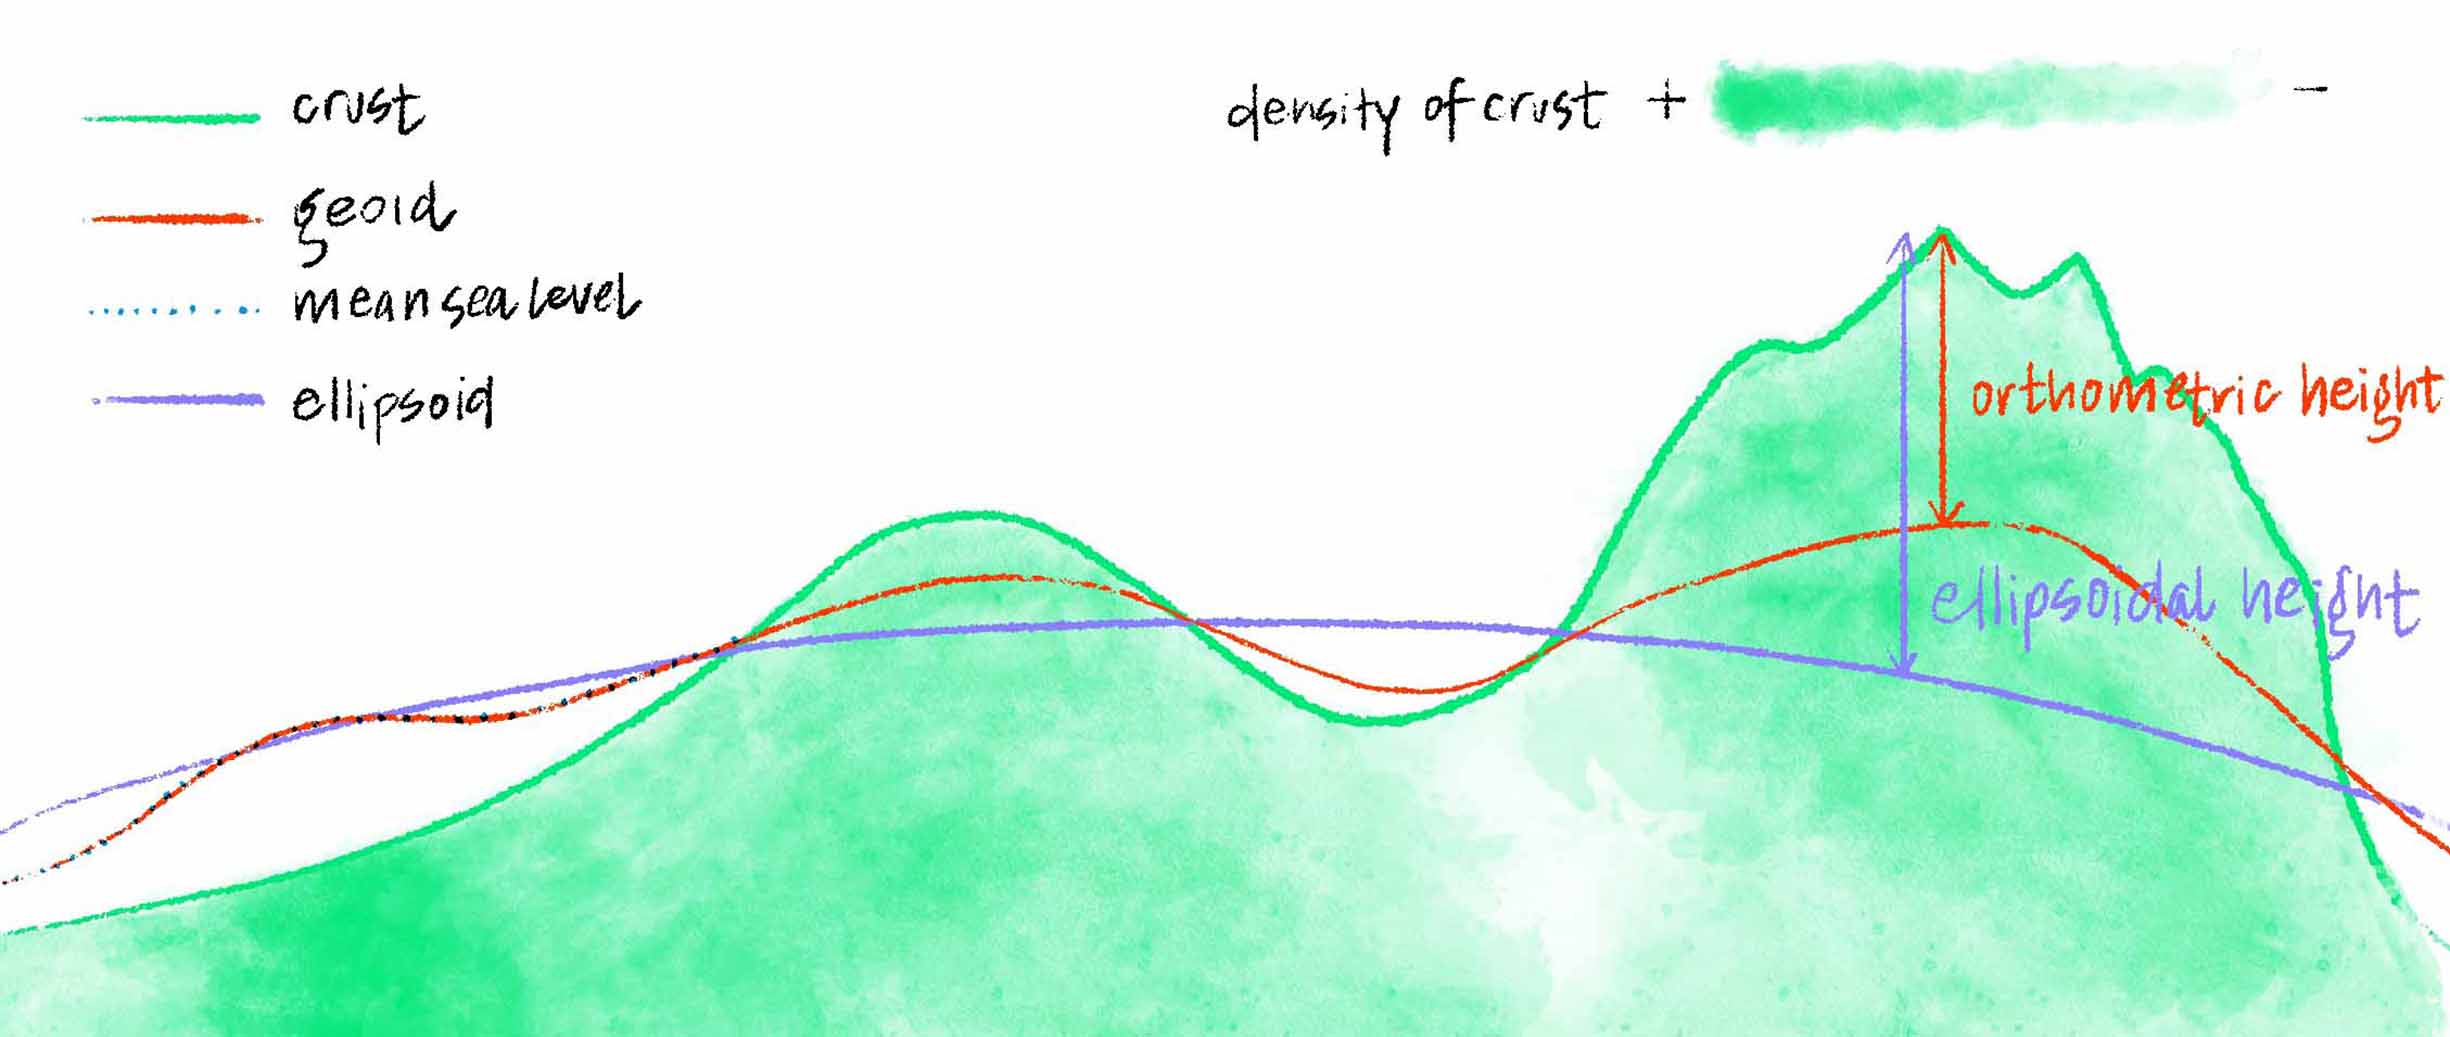 A sketch overlaying the crust with mountains, values, and varying densities; the ellipsoid's boundary; and the geoid. Where the crust rises to form hills, the geoid also rises relative to the ellipsoid, though not so high as the crust itself. Where the crust is denser, geoid also rises.